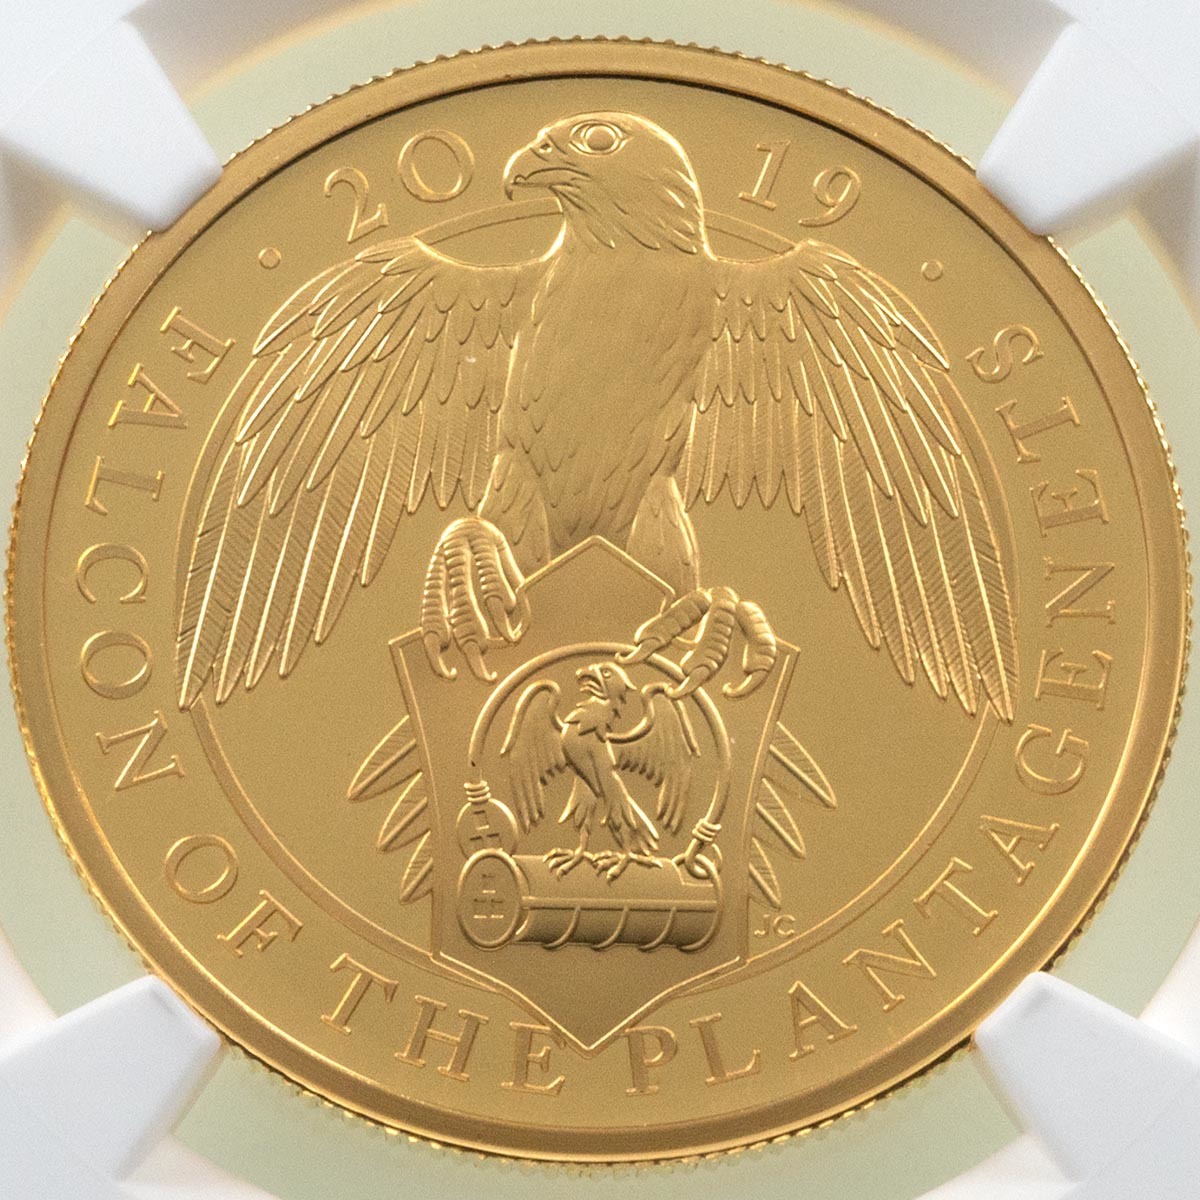 UK19QFGP 2019 Queen's Beasts Falcon Of The Plantagenets One Ounce Gold Proof Coin NGC Graded PF 69 Ultra Cameo Reverse